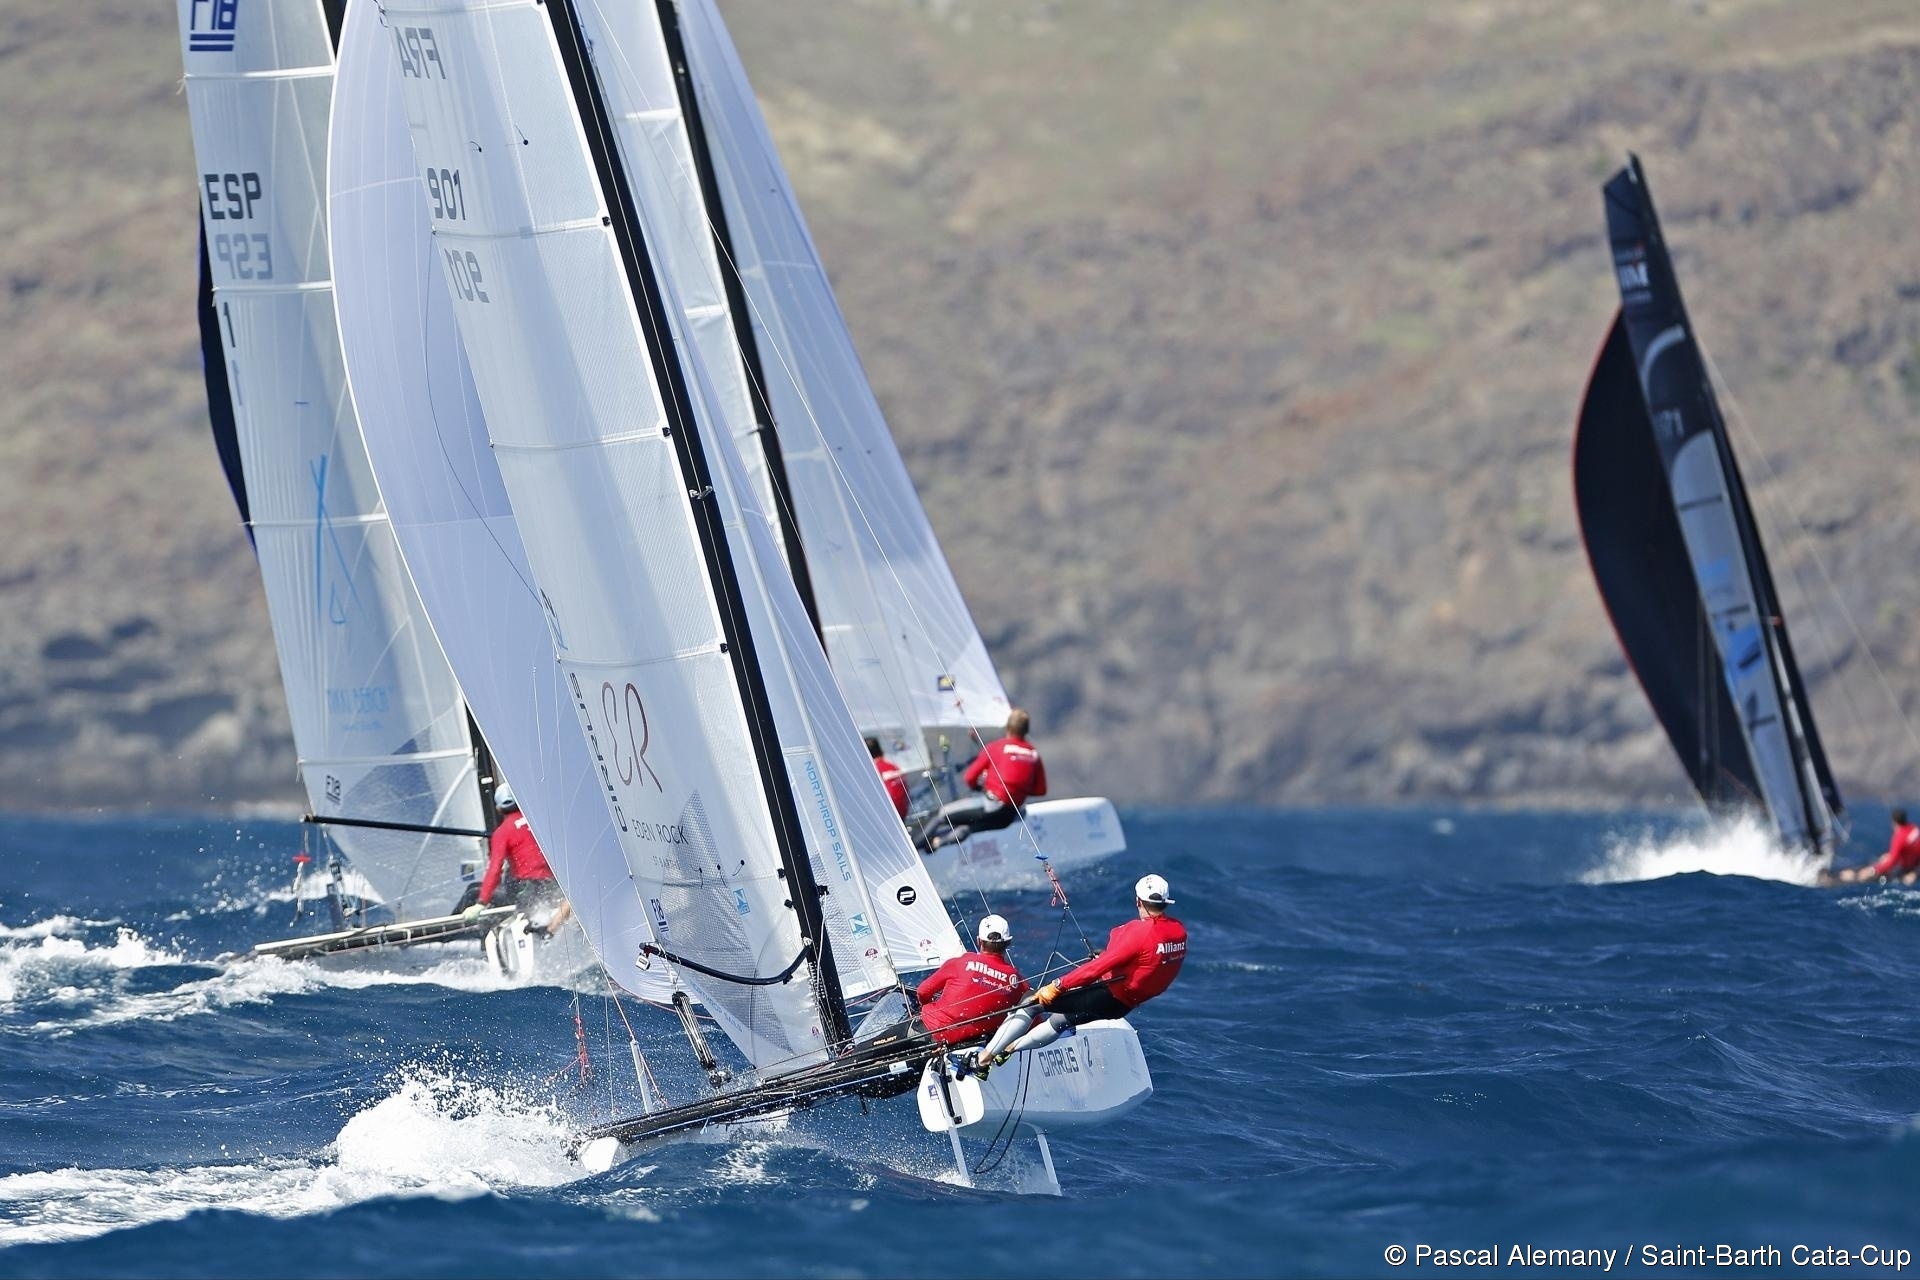  Multihulls  StBarth Cata Cup 2018, StBarthelemy FRA, final results